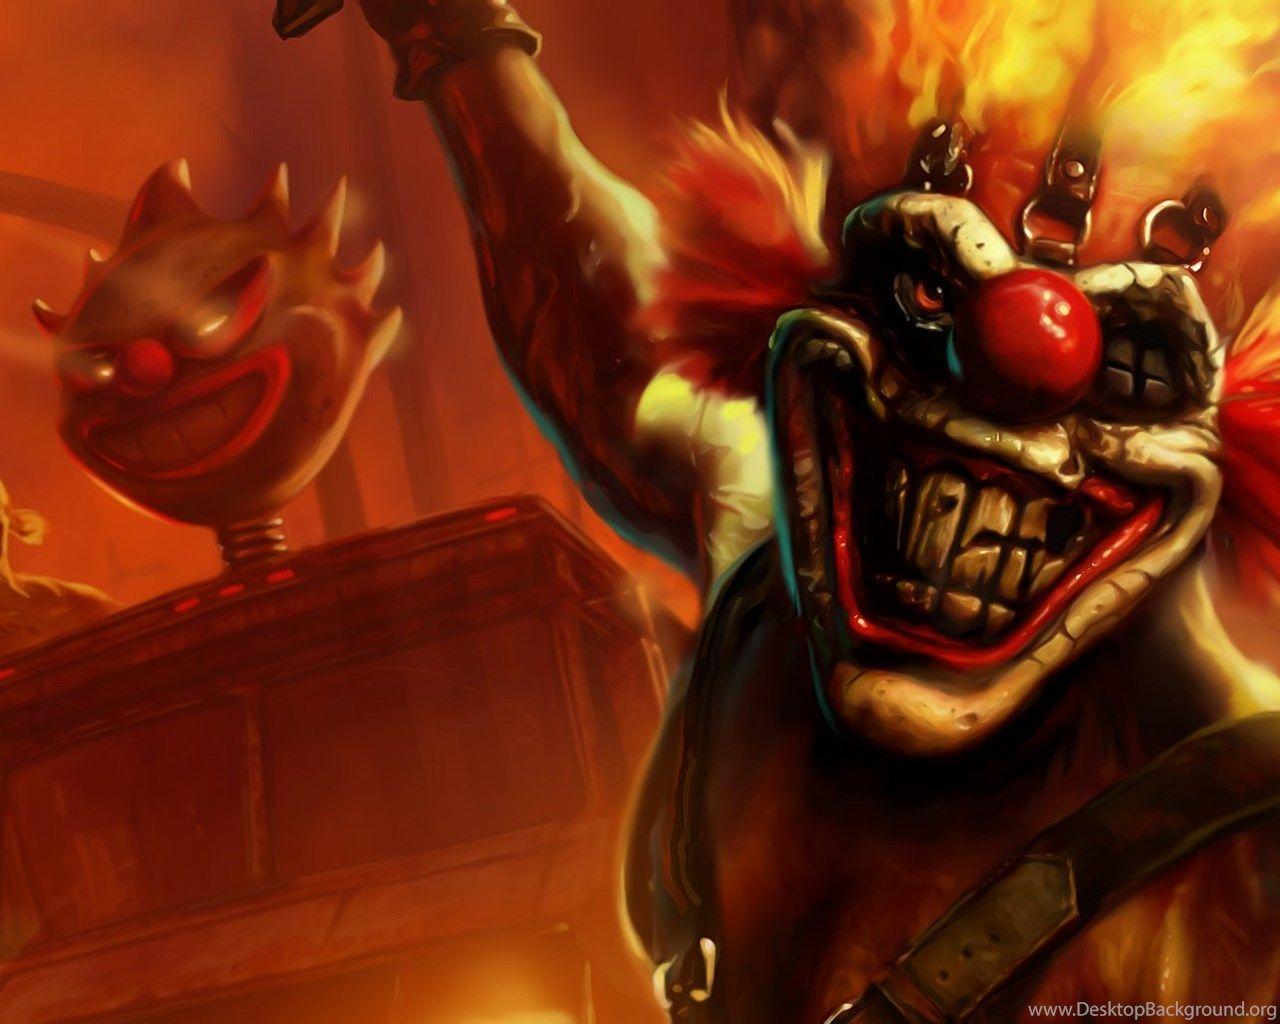 Sweet Tooth Twisted Metal, 1920x1080 HD Wallpaper And FREE Stock